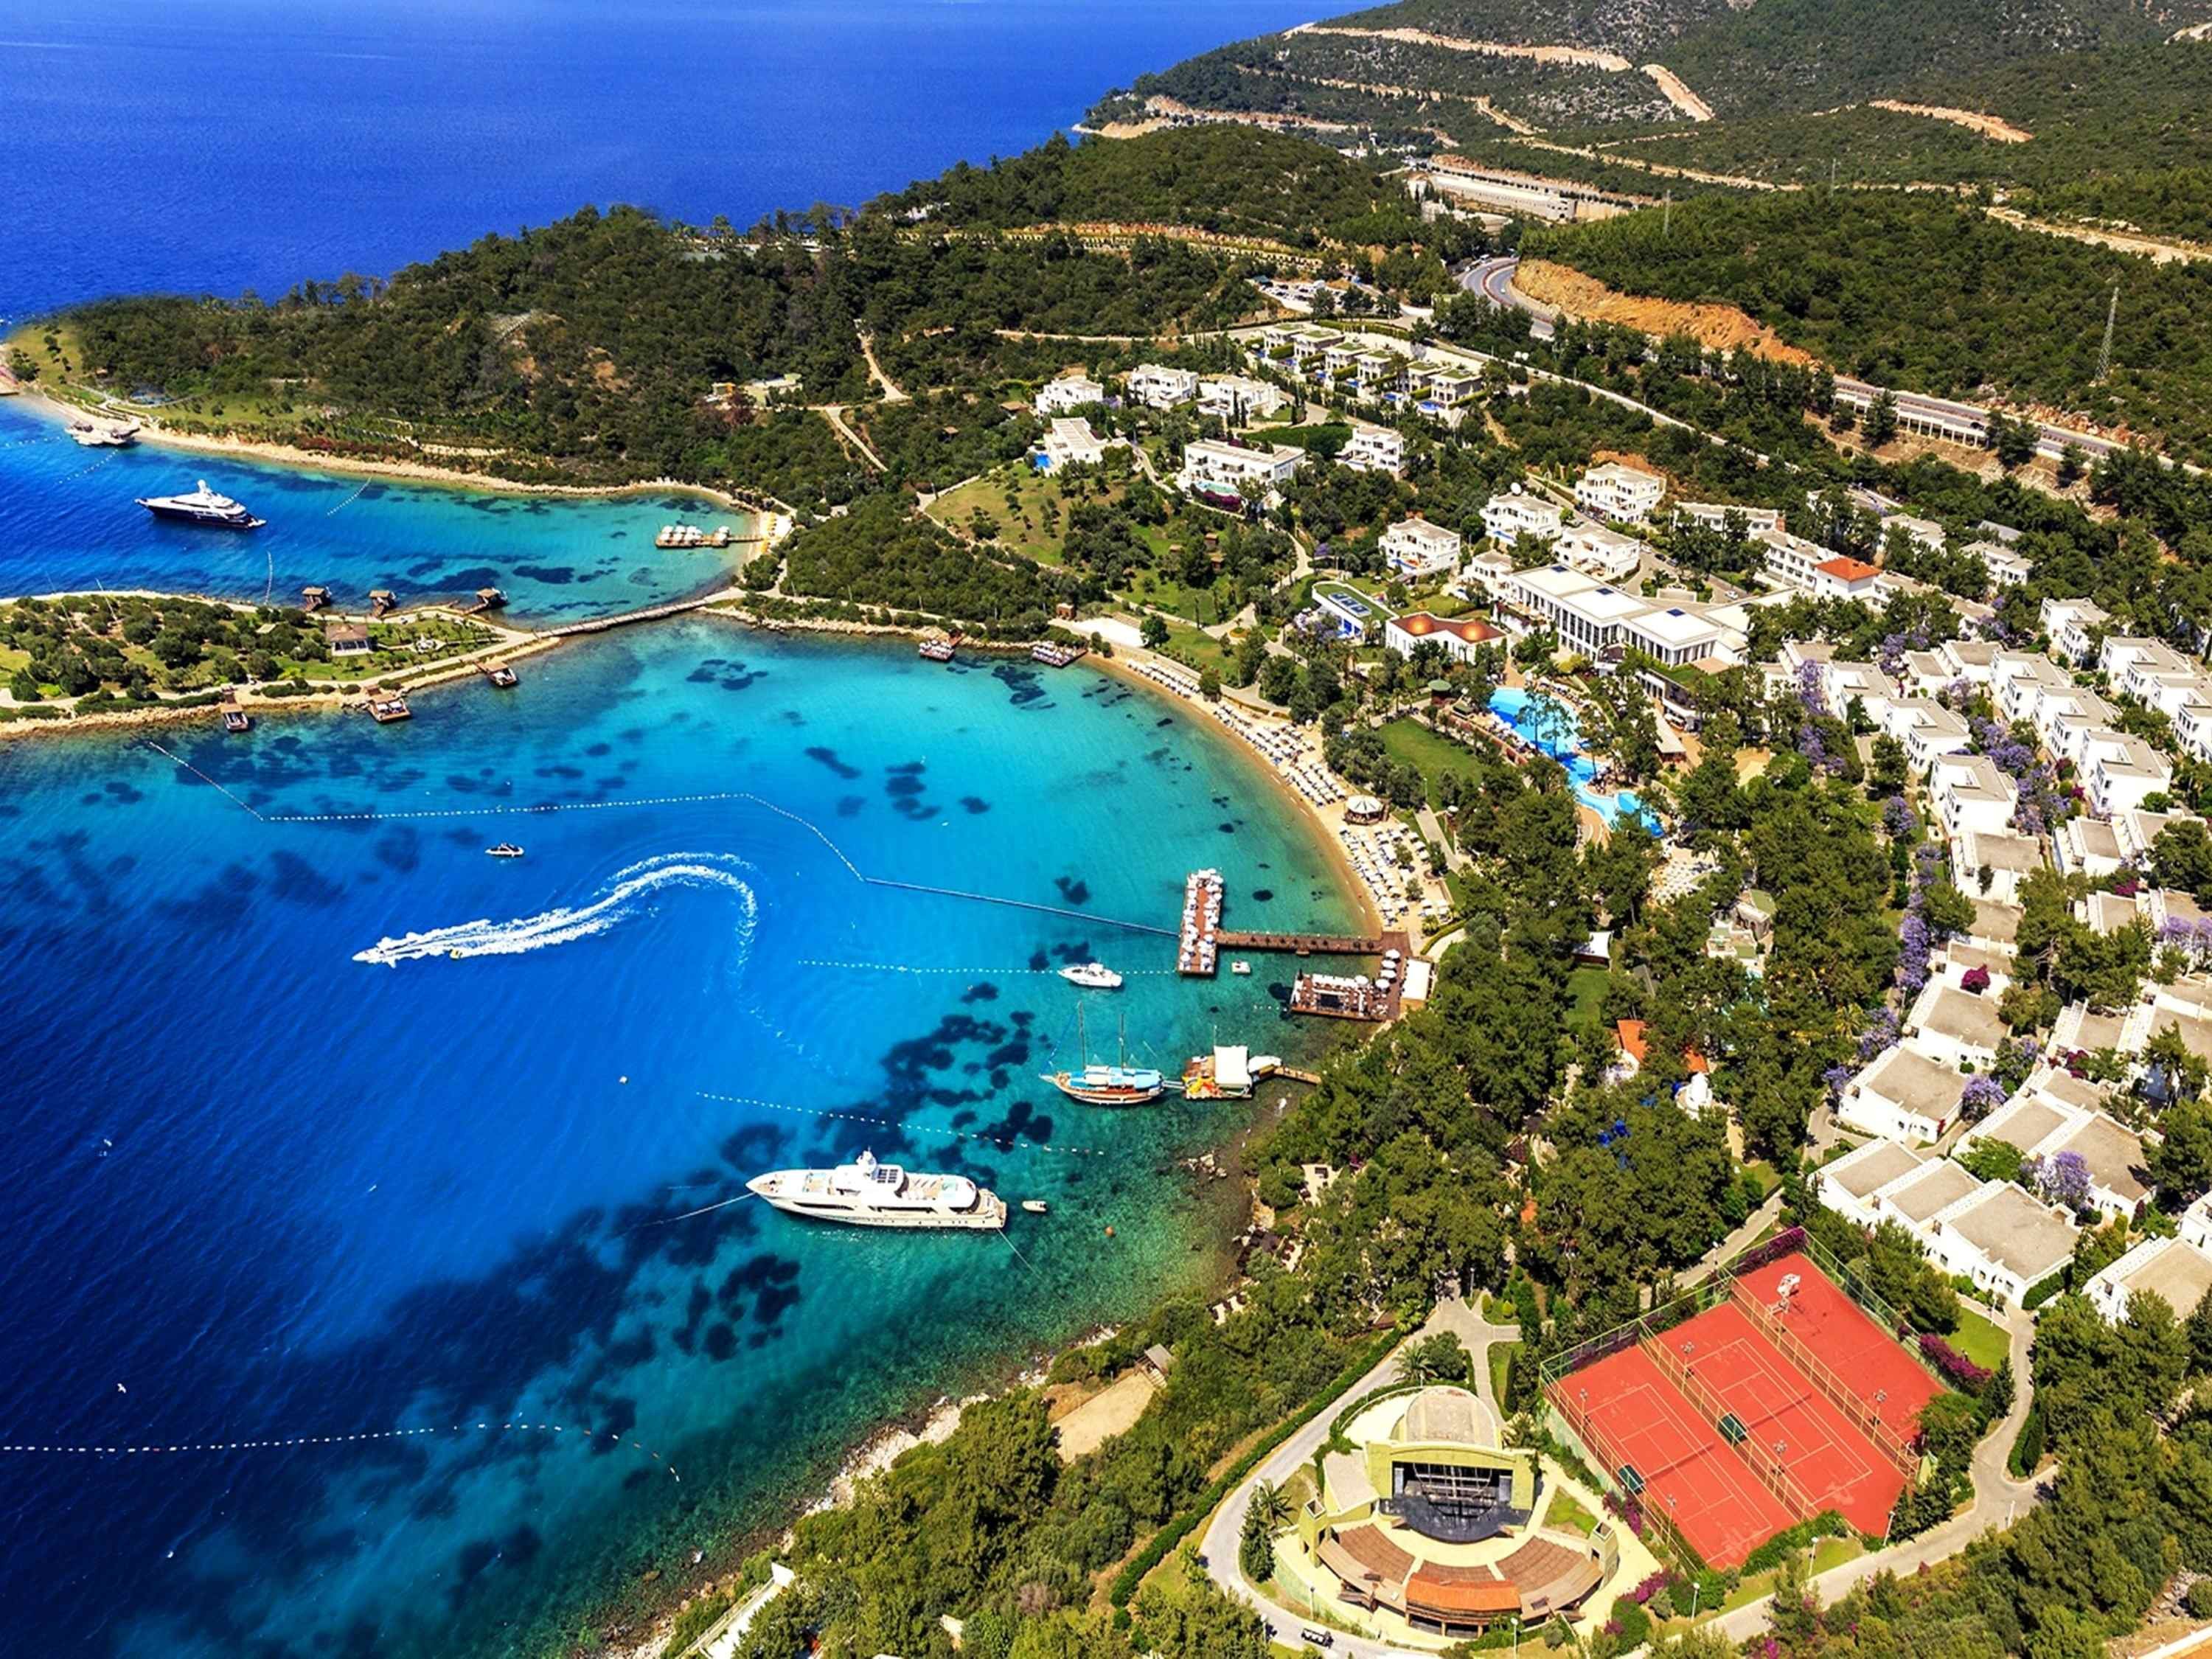 Photo of Rixos Bodrum Beach with turquoise pure water surface